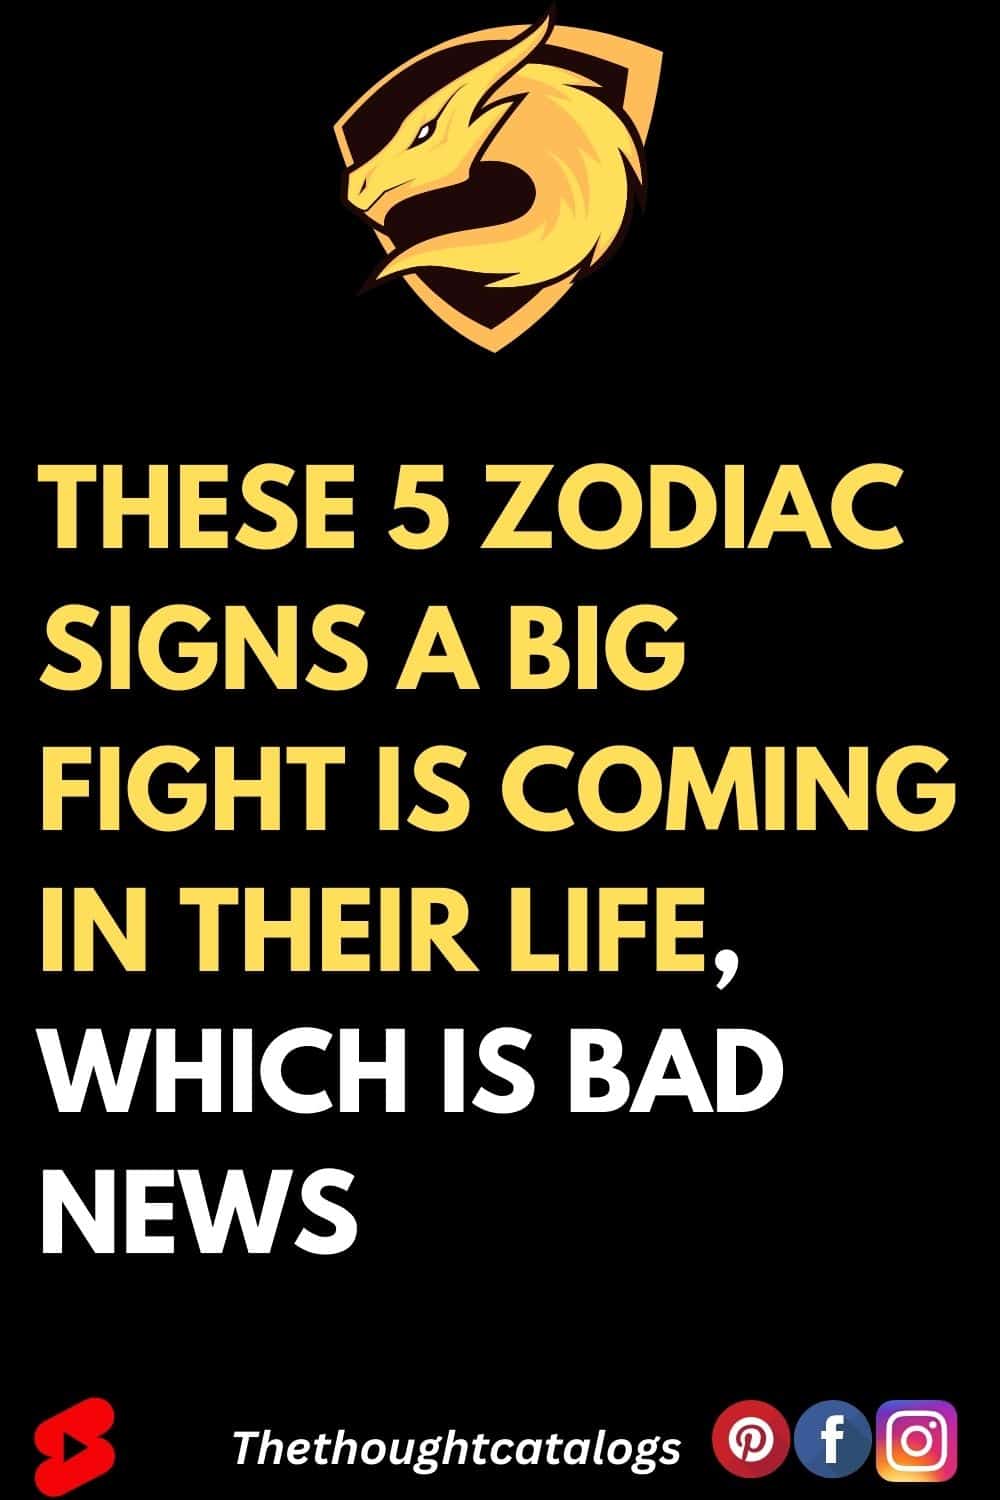 These 5 Zodiac Signs A Big Fight Is Coming In Their Life, Which Is Bad News